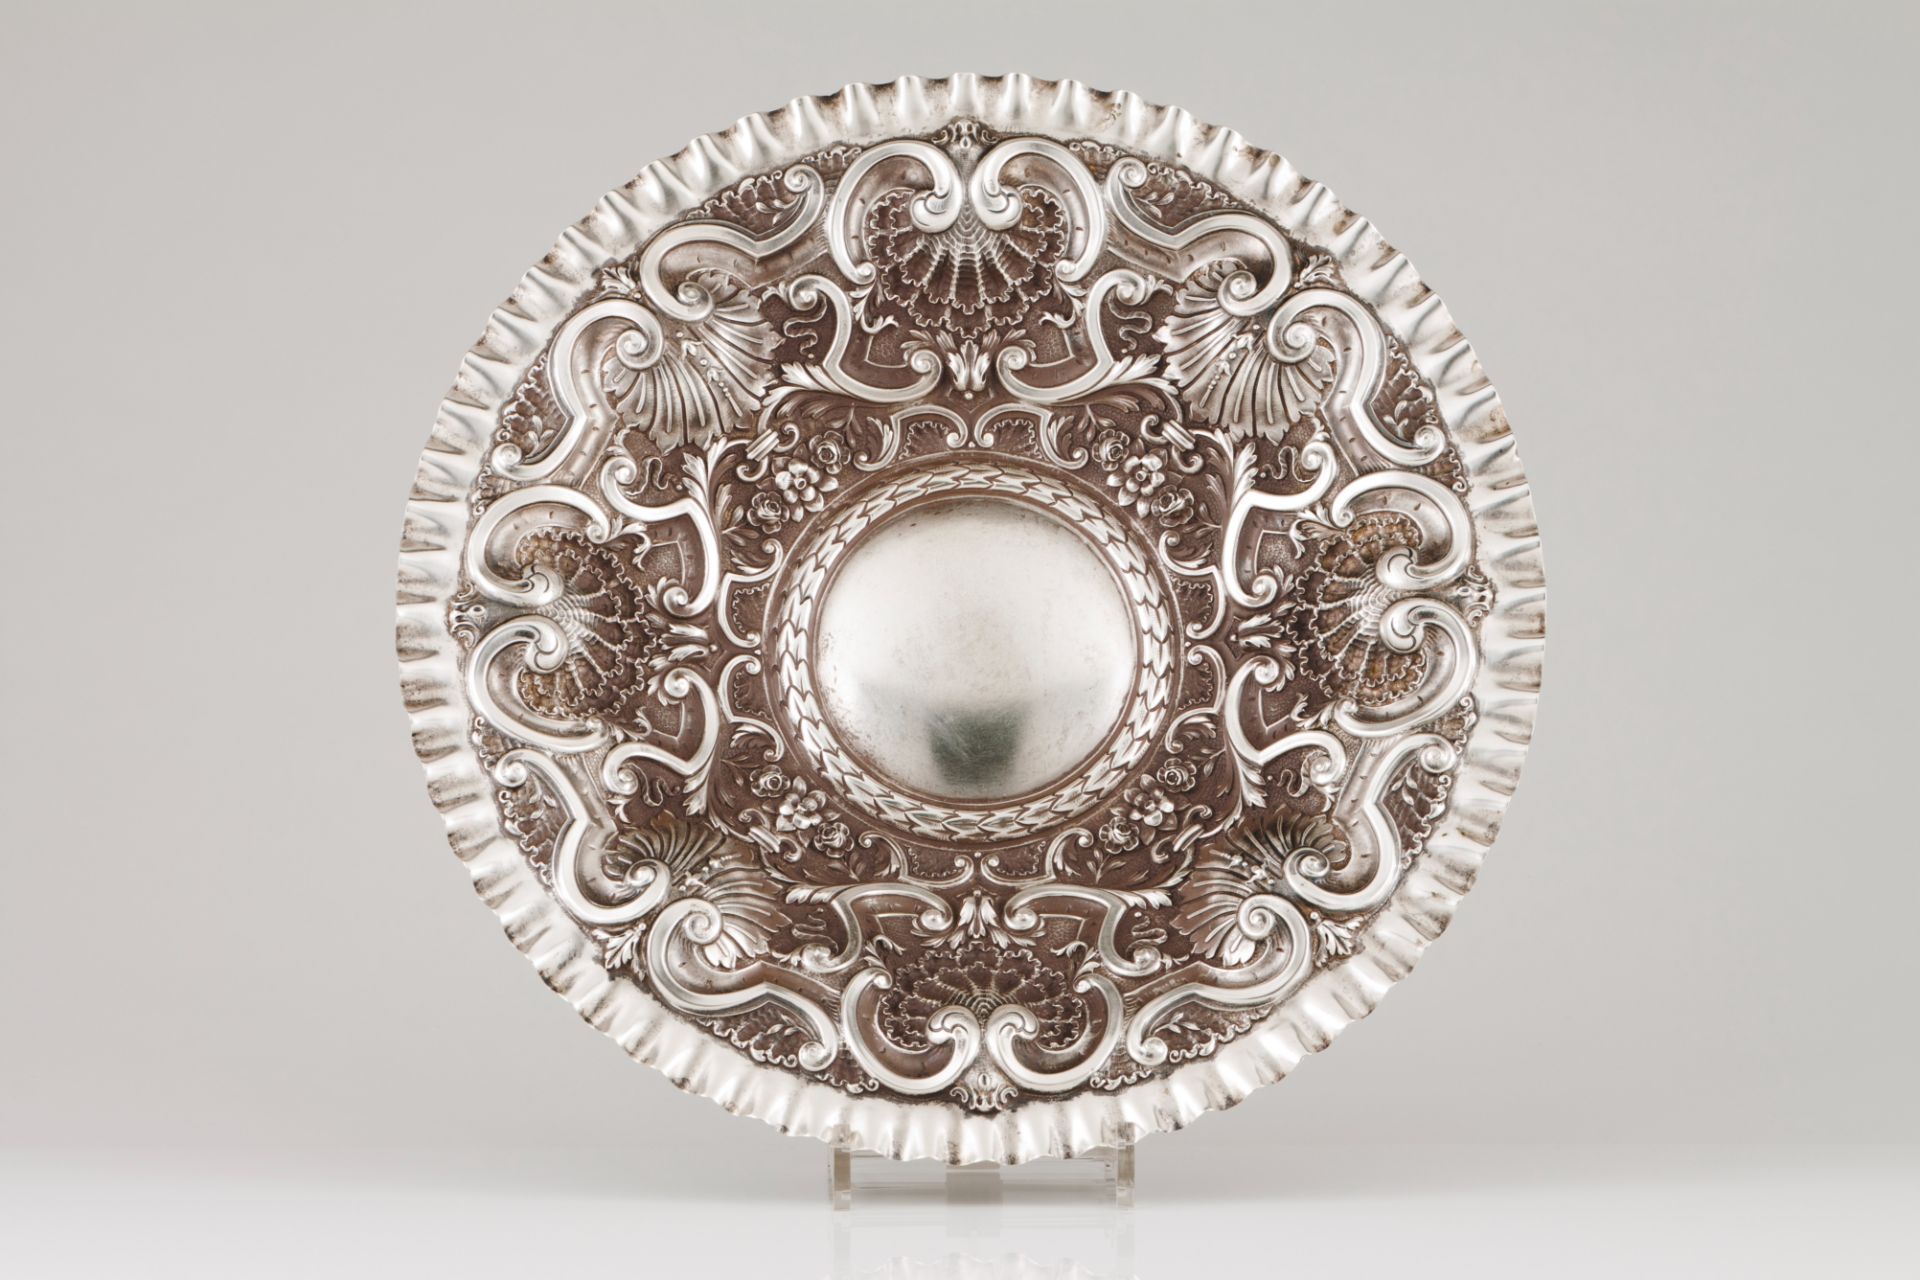 A suspension salverPortuguese silver Profuse raised decoration of foliage motifs, winglets and